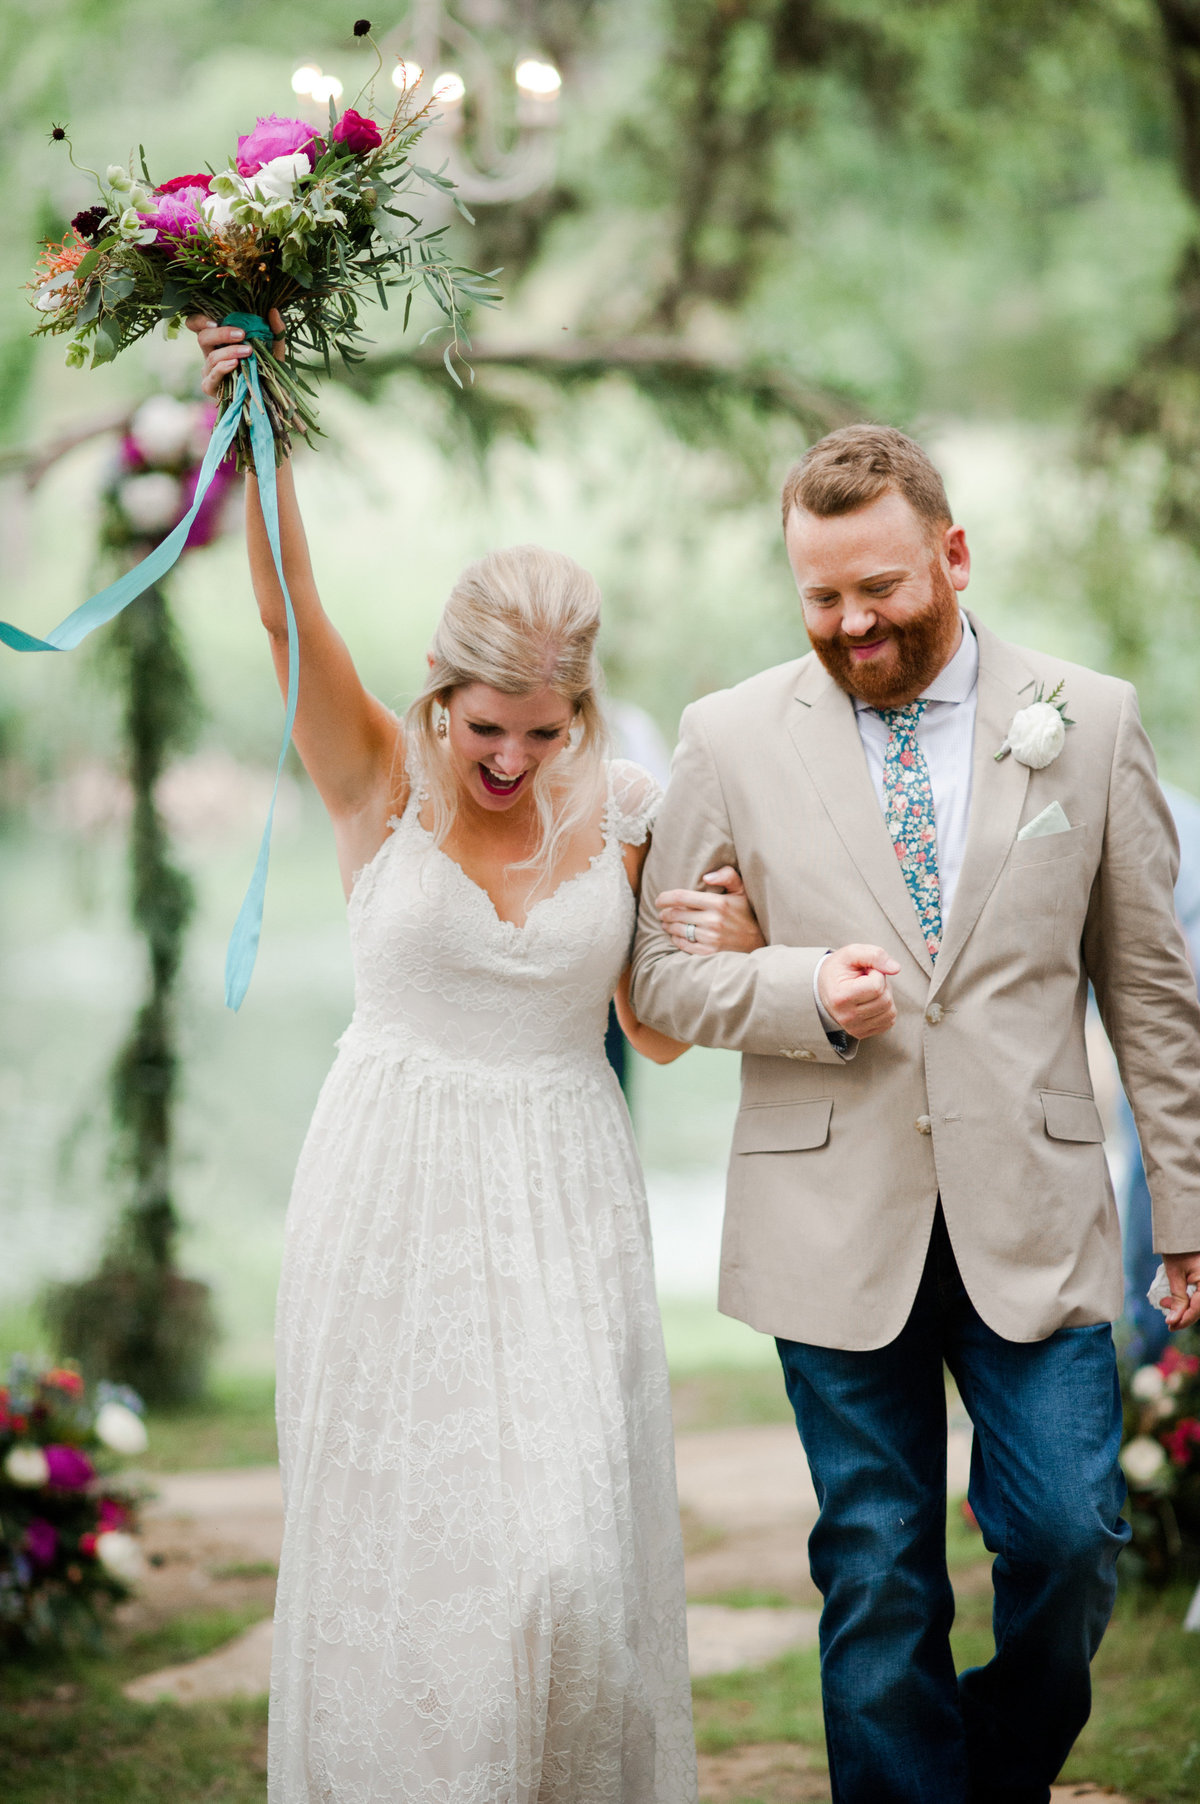 GRANT CANDICE WED 2016-0326